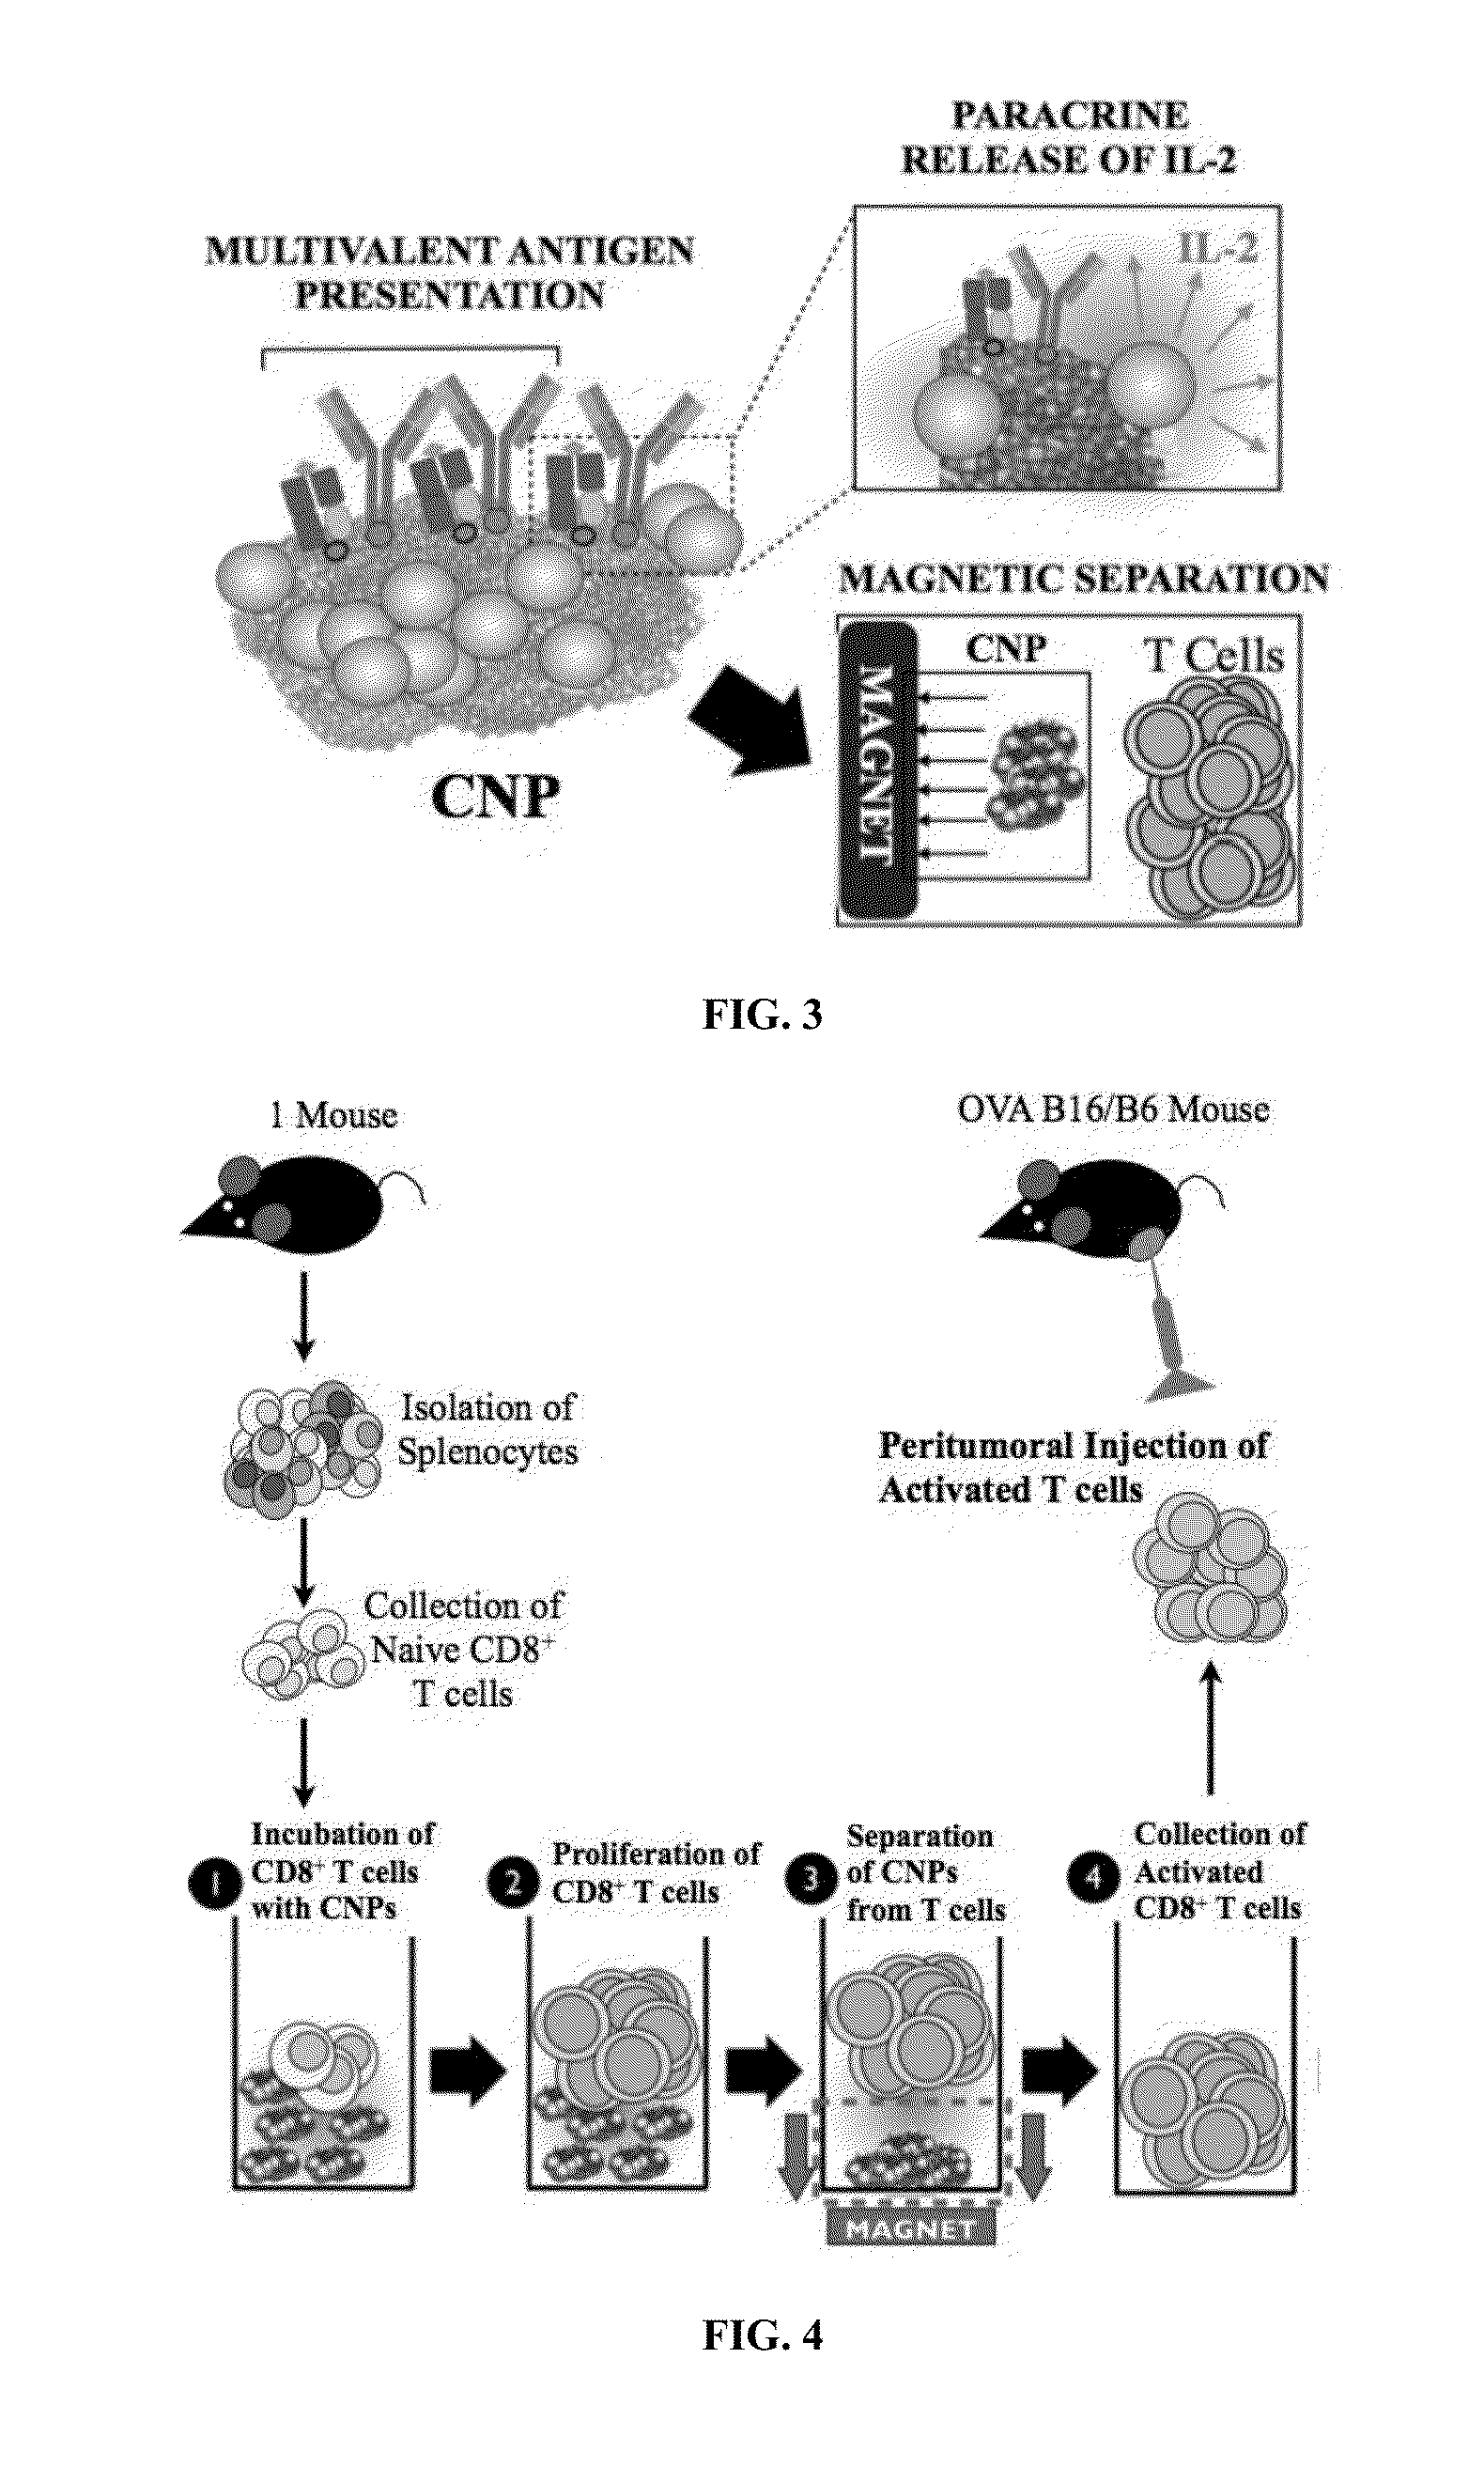 Carbon Nanotube Compositions and Methods of Use Thereof